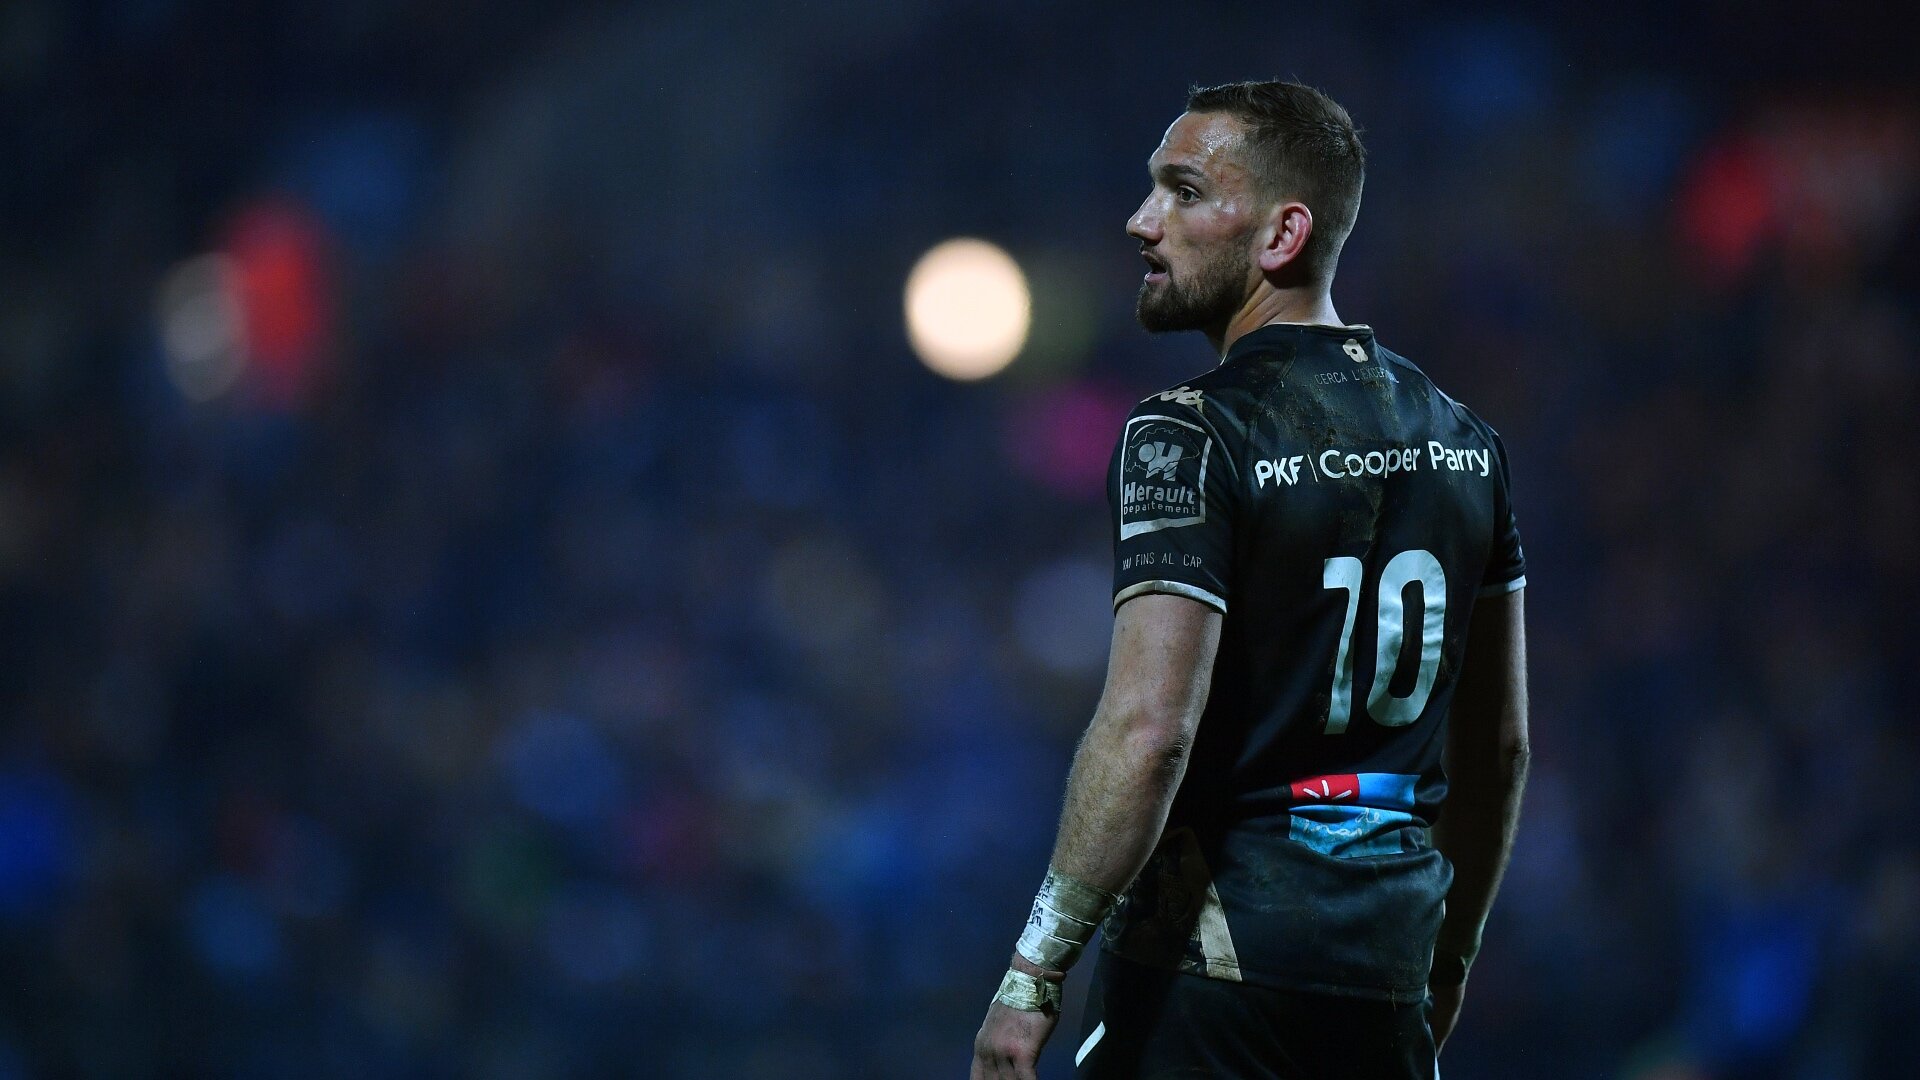 Twenty-five per cent wage cut likely if Cruden takes up Glasgow's offer